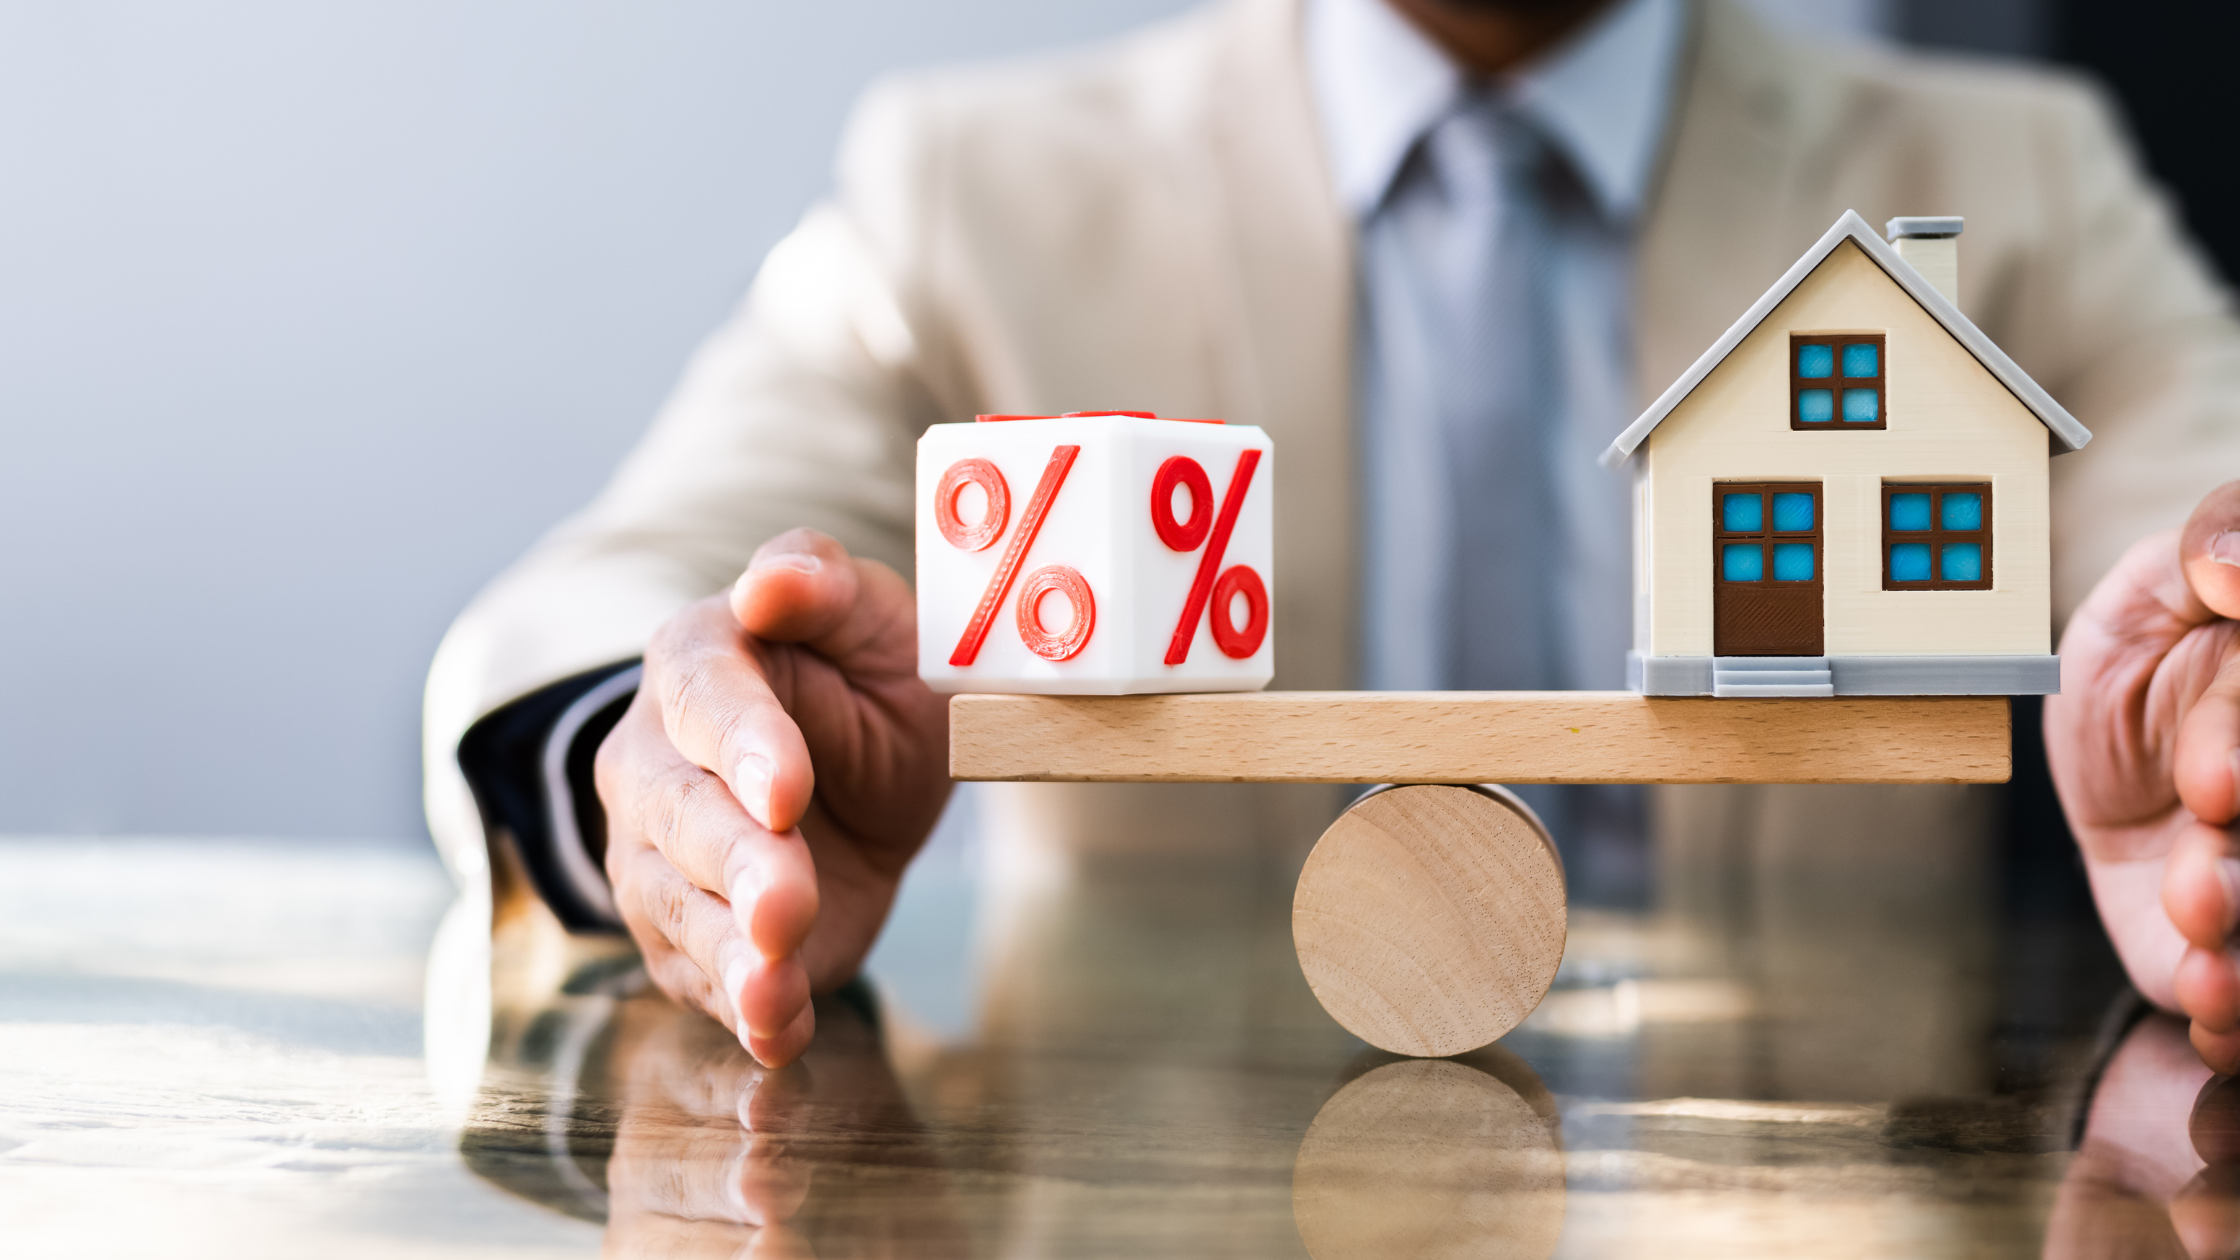 Strategies for Physicians Dealing with High-Interest Rates on Home Loans